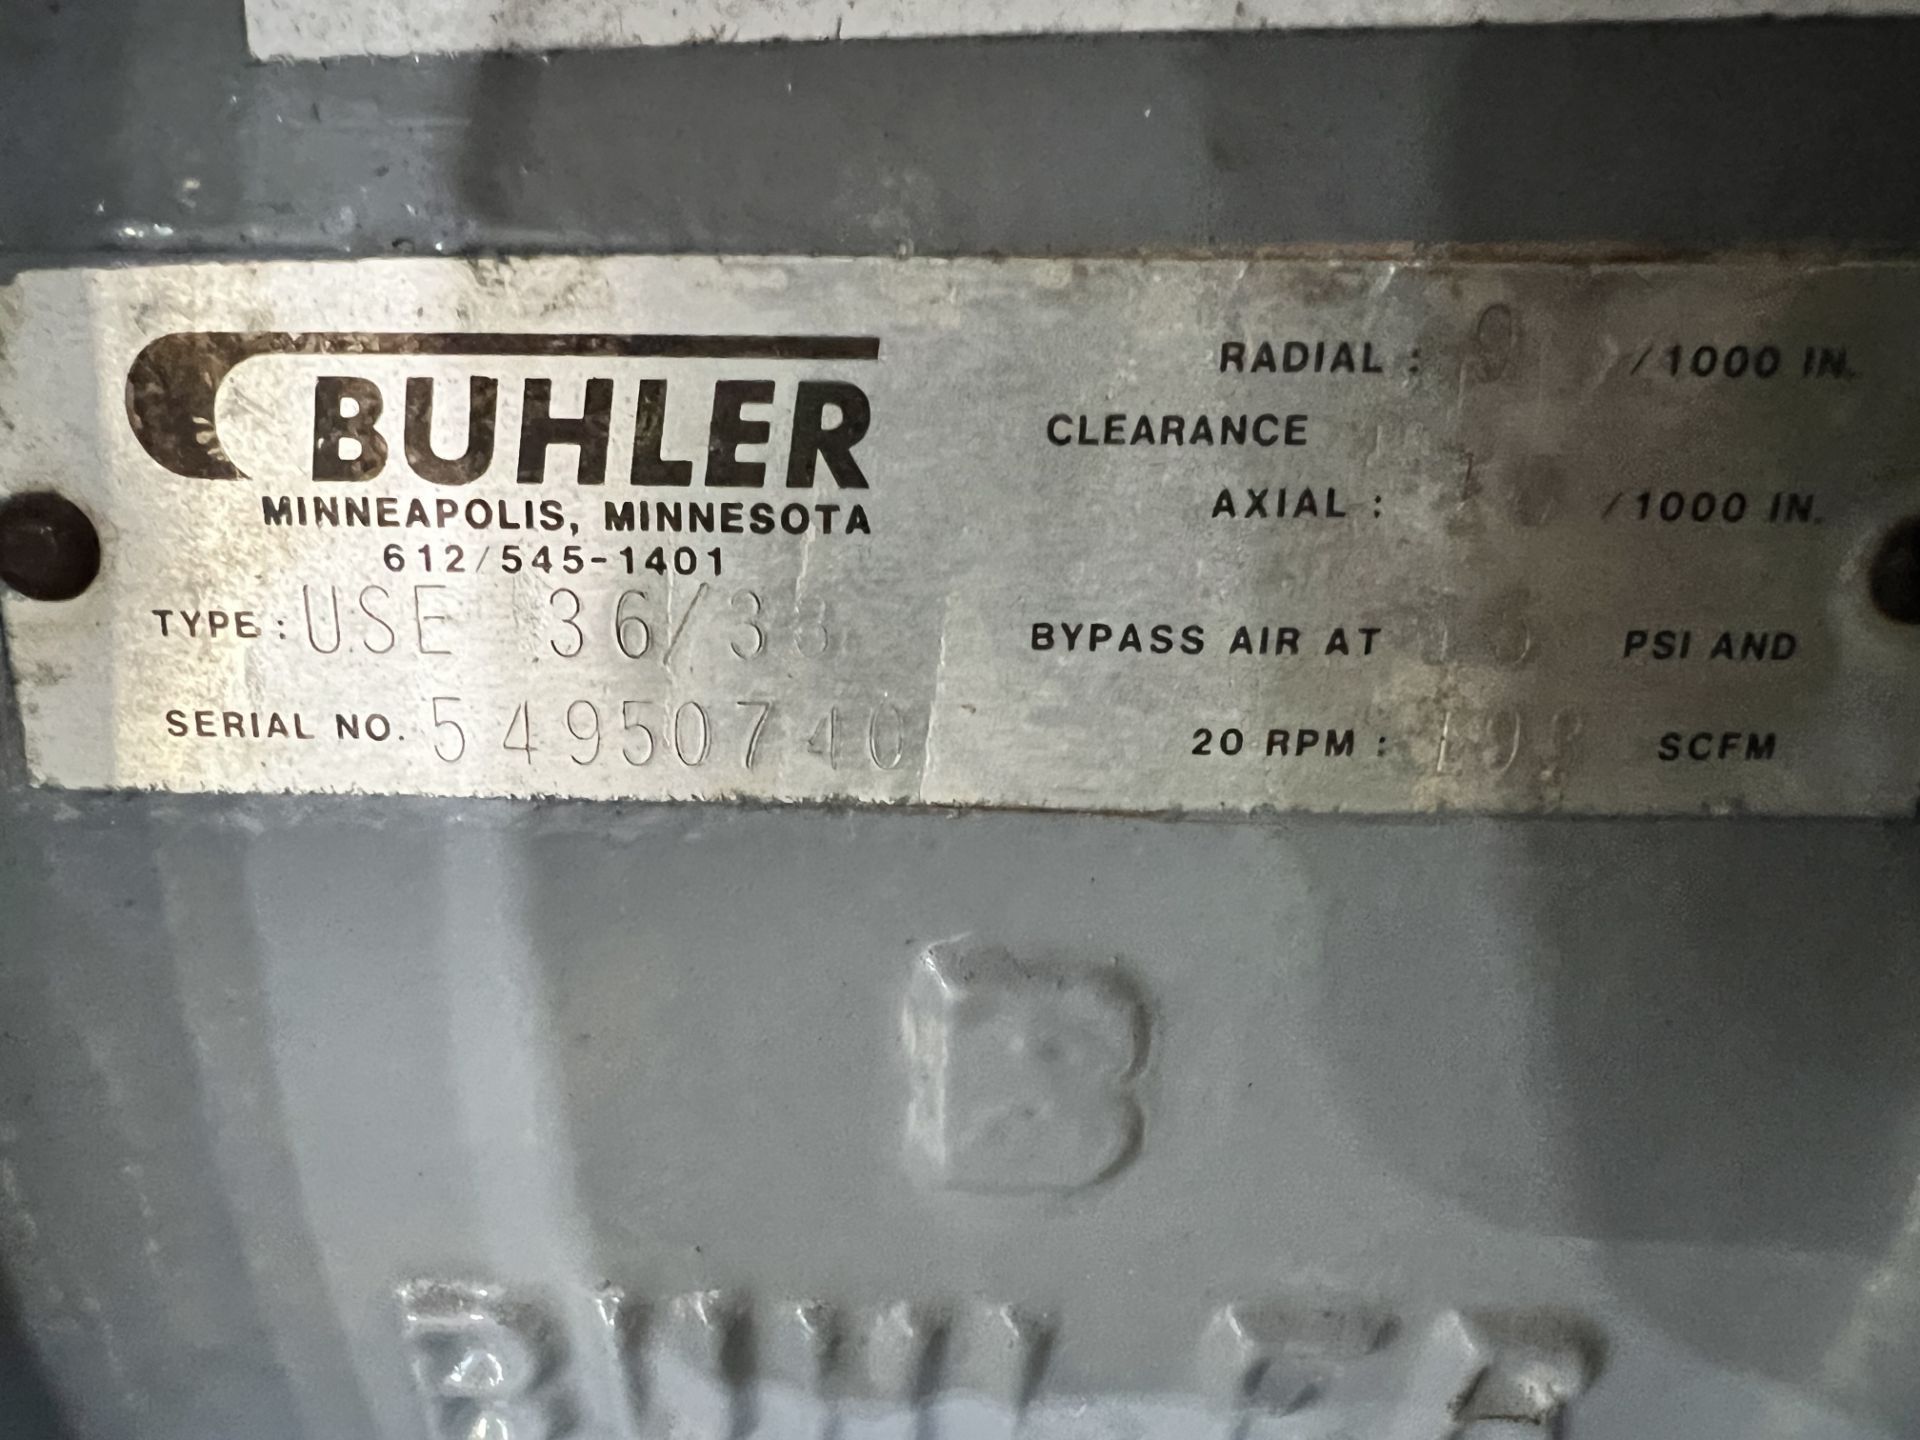 NEW BUHLER ROTARY AIRLOCK VALVE, MODEL USE 36/3, S/N 54950740 (SIMPLE LOADING FEE $110) - Image 6 of 9